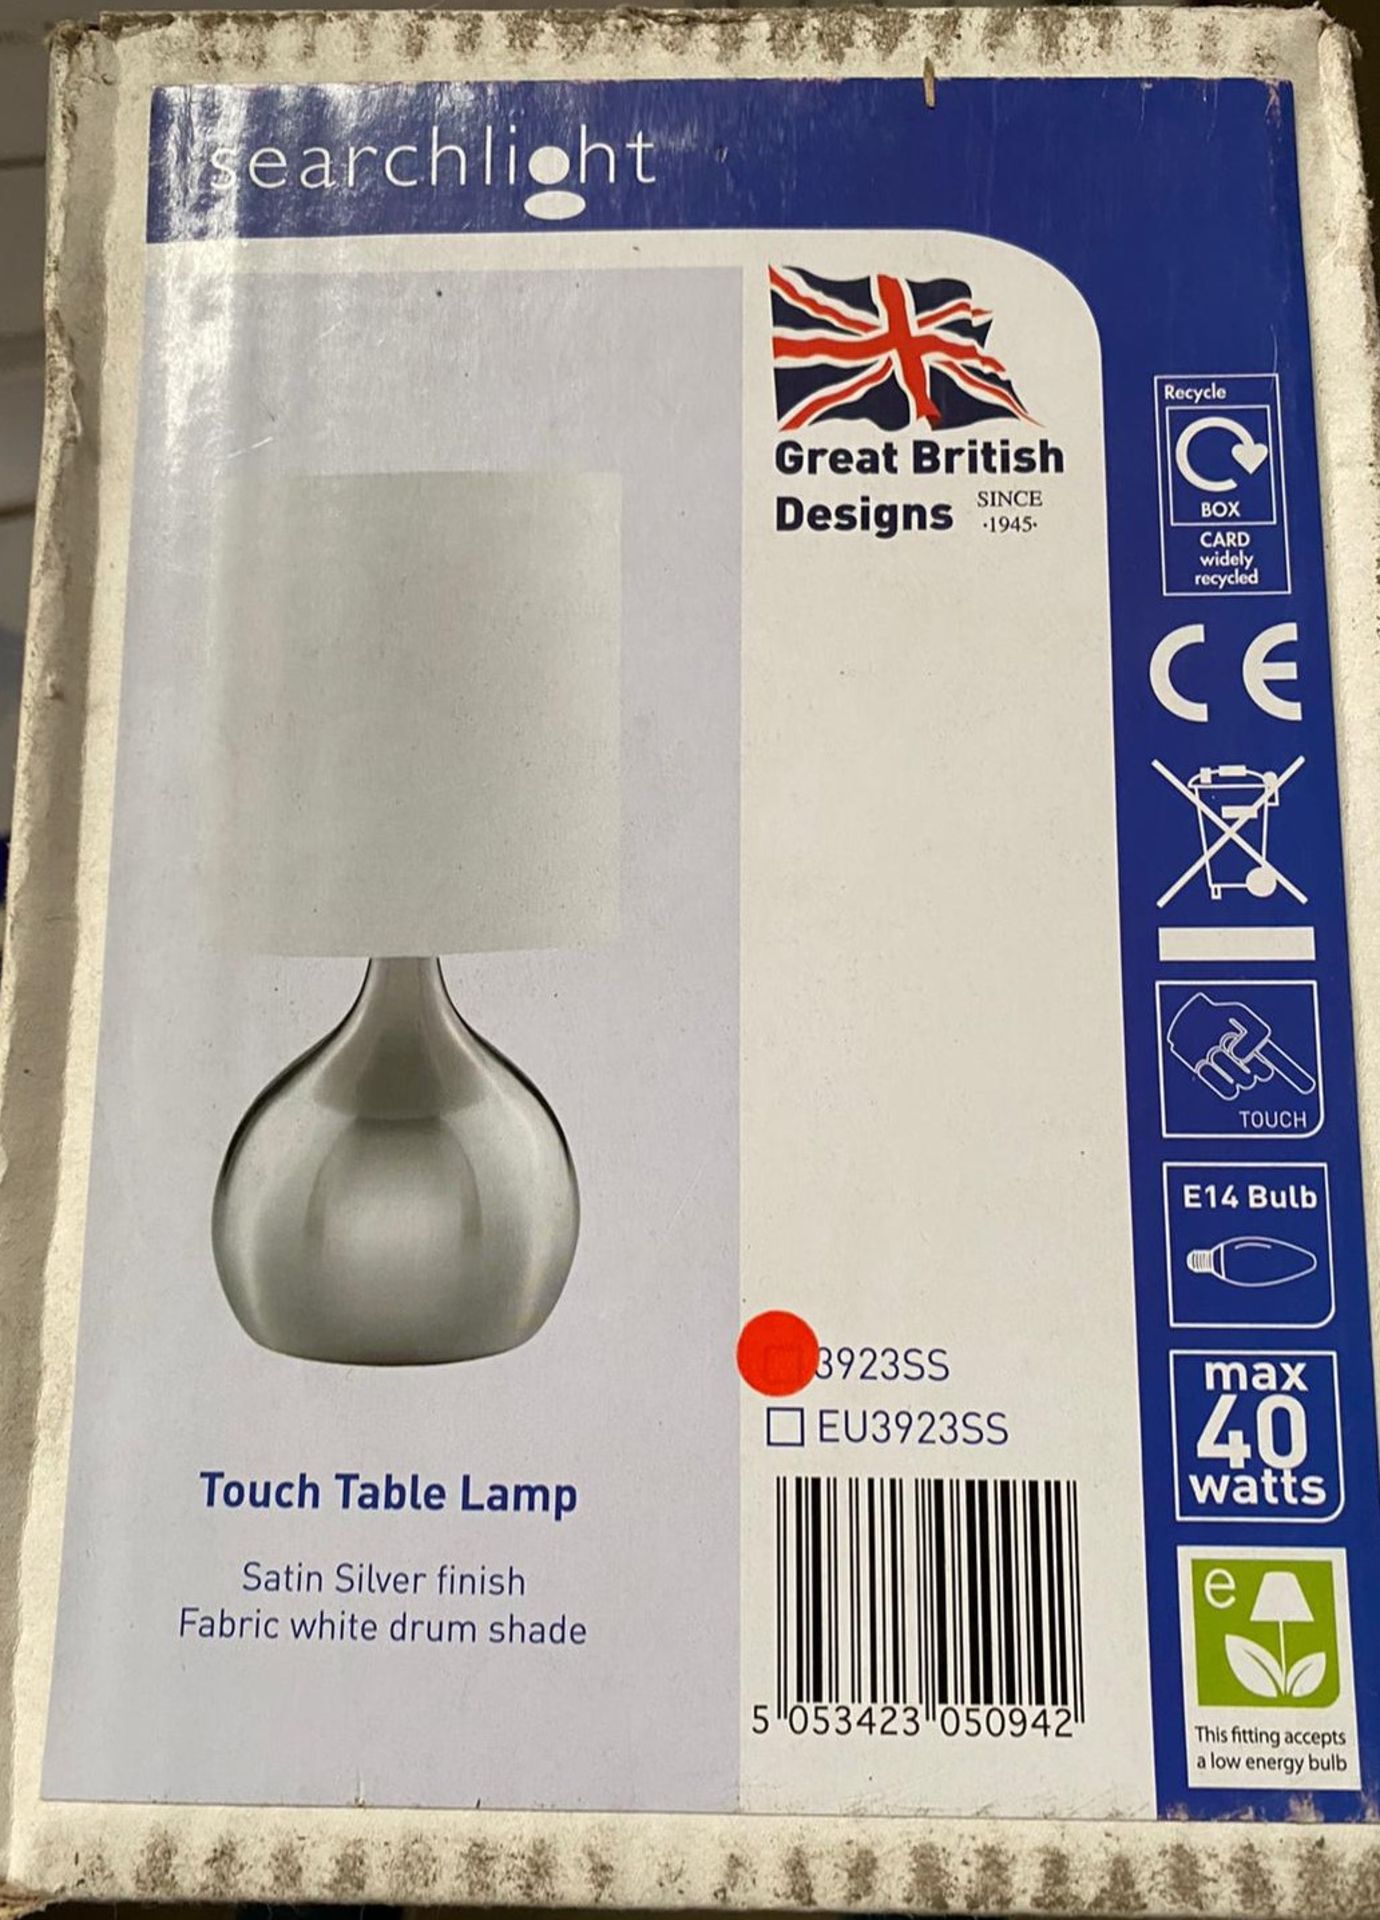 1 x Searchlight Touch Table Lamp in satin silver - Ref: 3923SS - New and Boxed Stock